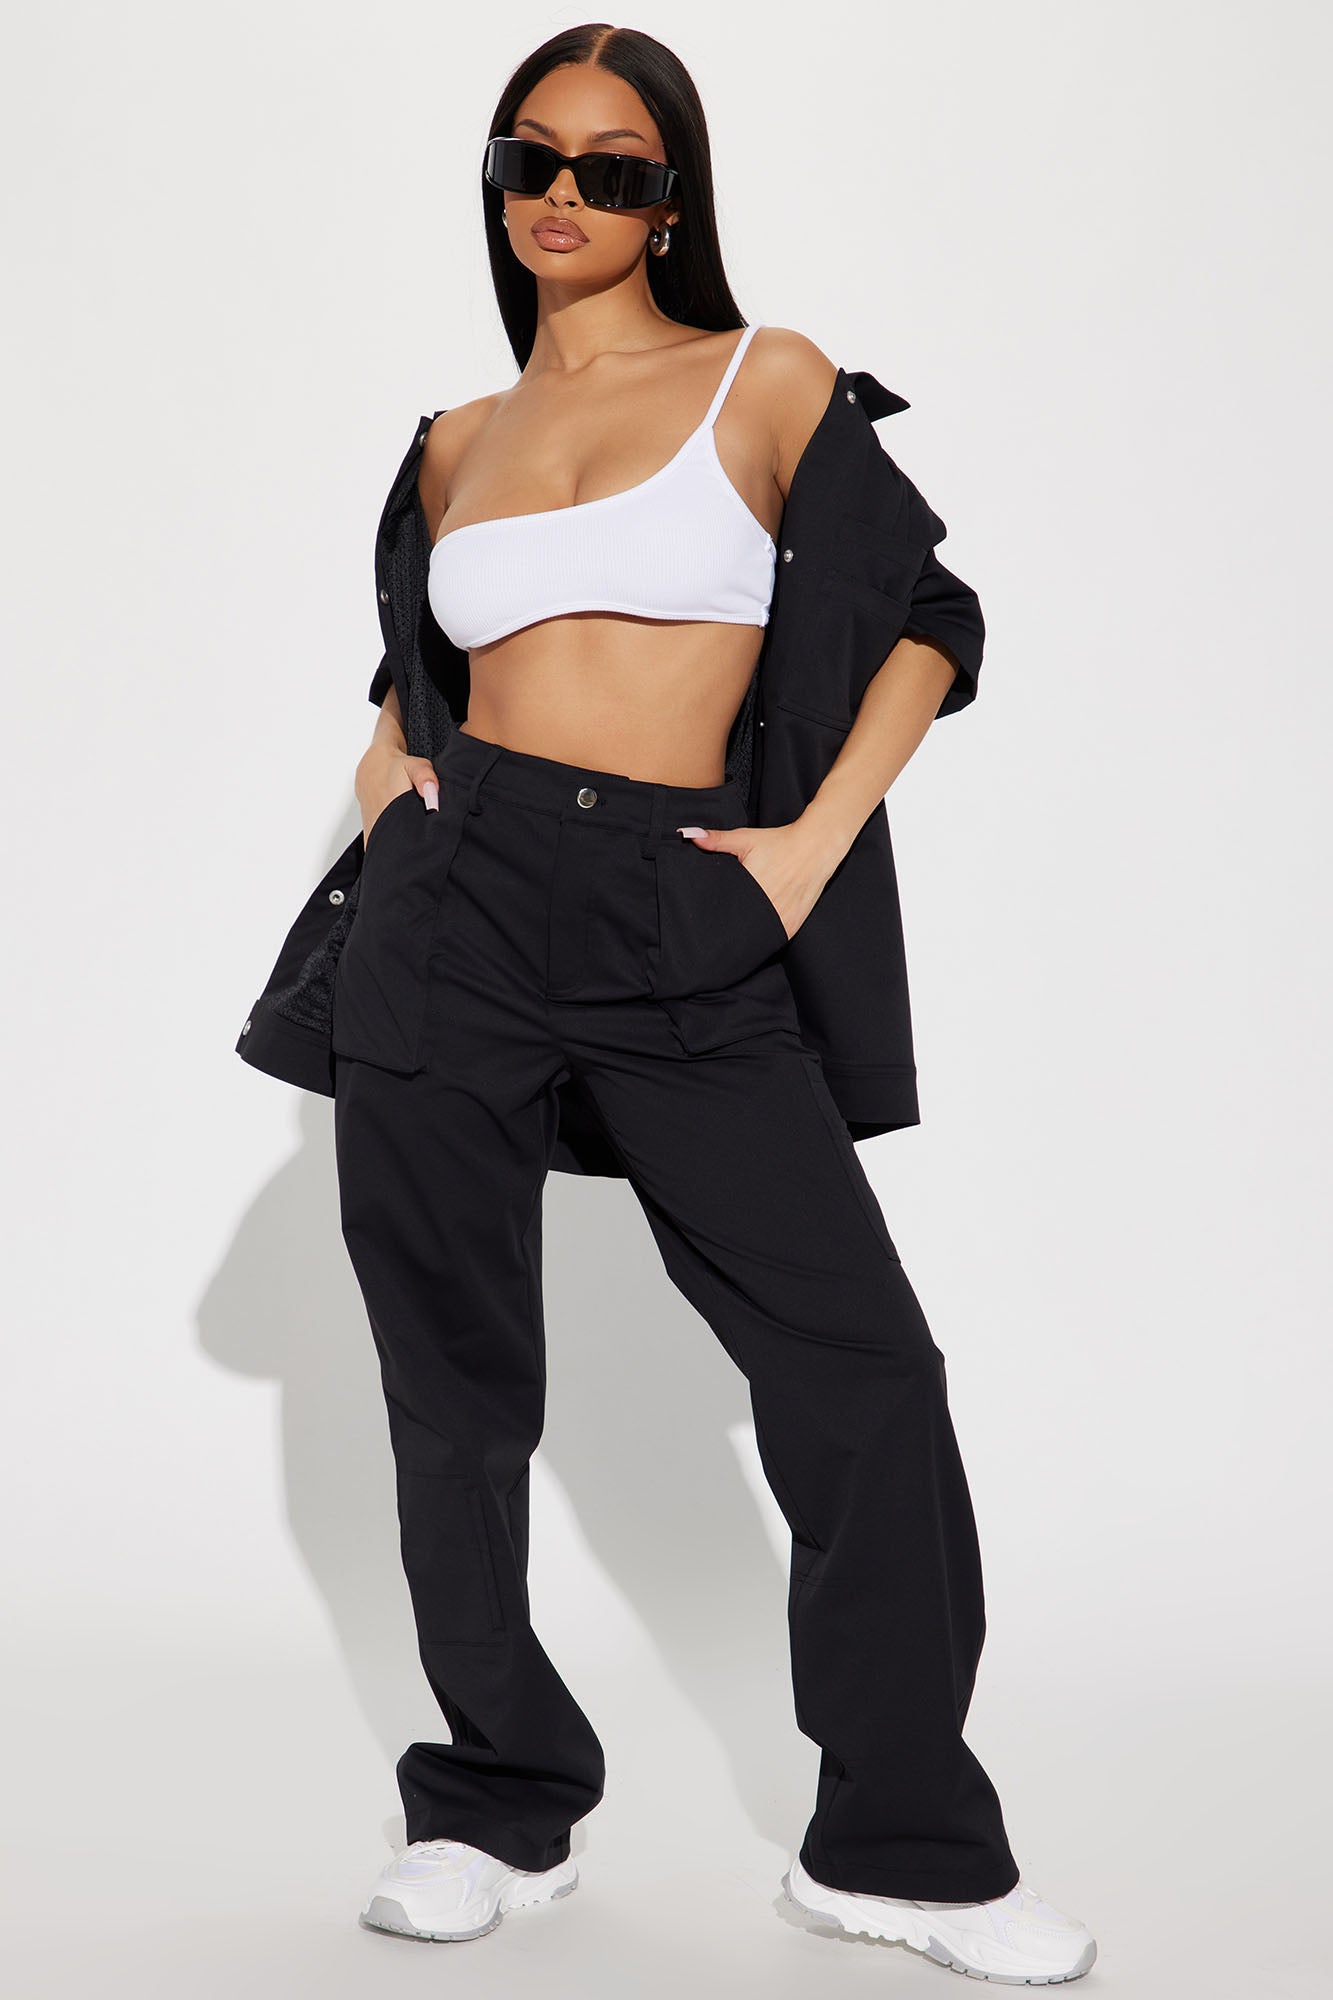 All Kinds Of Reckless Top - Black  Fashion pants, Fashion outfits, Cargo  pants outfit